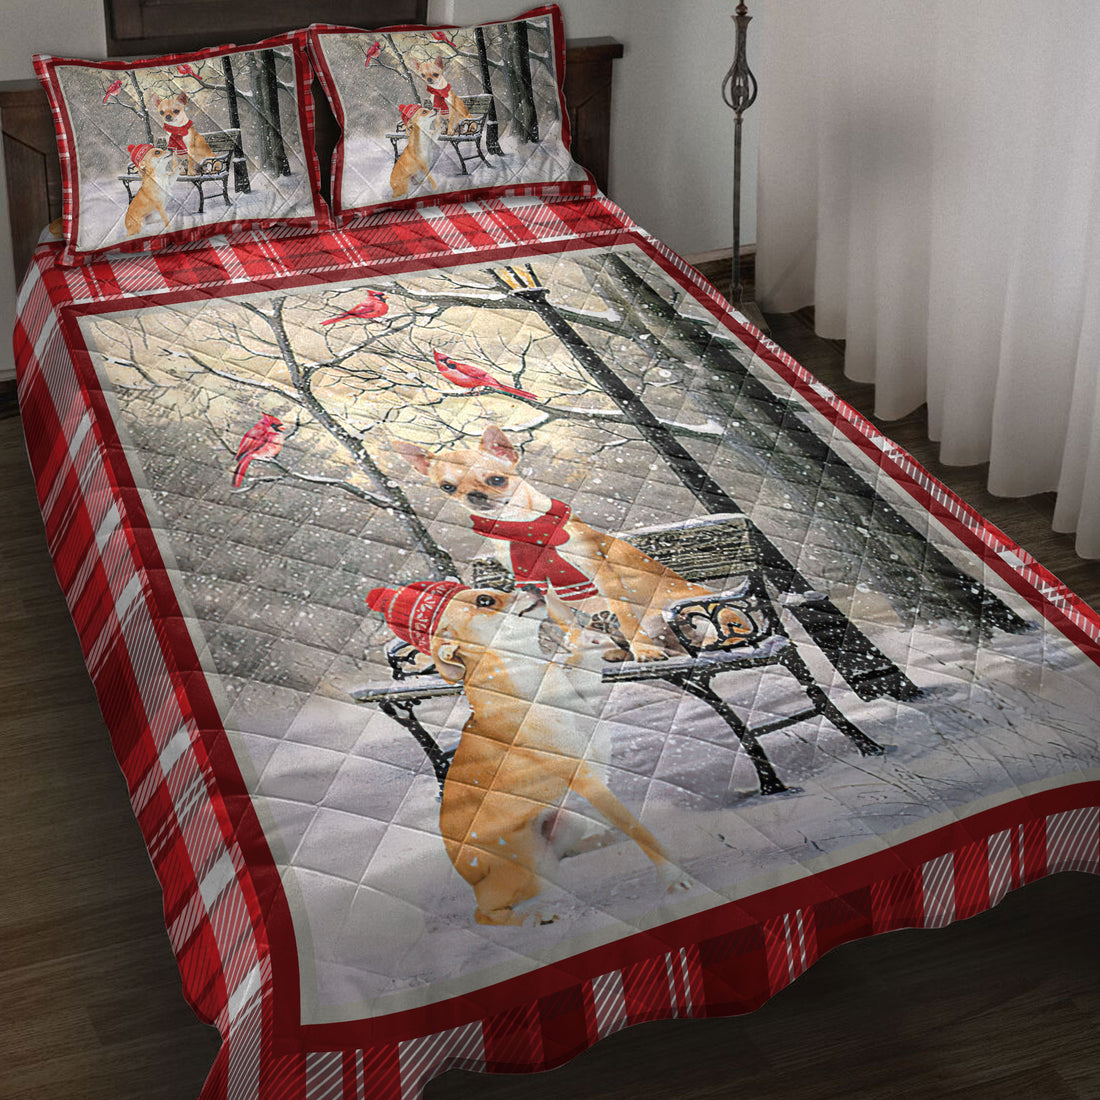 Ohaprints-Quilt-Bed-Set-Pillowcase-Chihuahua-Hello-Christmas-Snowflake-Winter-Park-Cardinal-Holiday-Blanket-Bedspread-Bedding-3976-Throw (55'' x 60'')